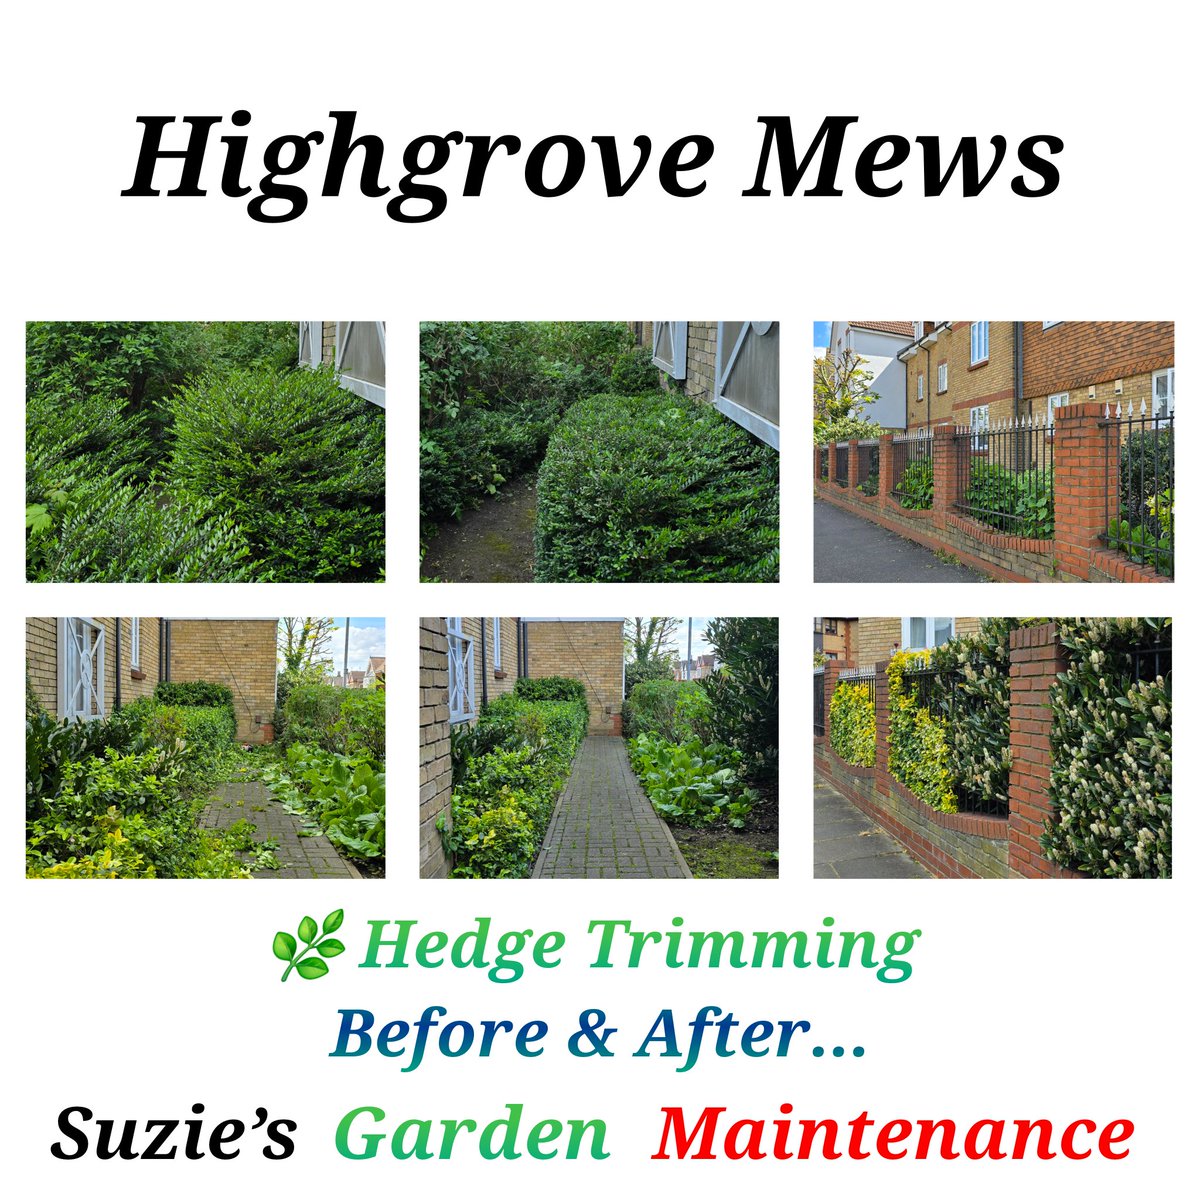 🌿 Garden Maintenance
🌳🏢🌳 Highgrove Mews 

🌿  #Hedge_Trimming #Shrubs
🥤  #Litter_Picking 
🍂  #Leaf #Cuttings #Clearance 
🧹  #Sweeping #Tidy #Pathways
♻️  #Recycling #GreenWaste

#Lady_Gardener #Garden #Grounds #Maintenance #Service 
#Photography #Gardening 
#Before #After